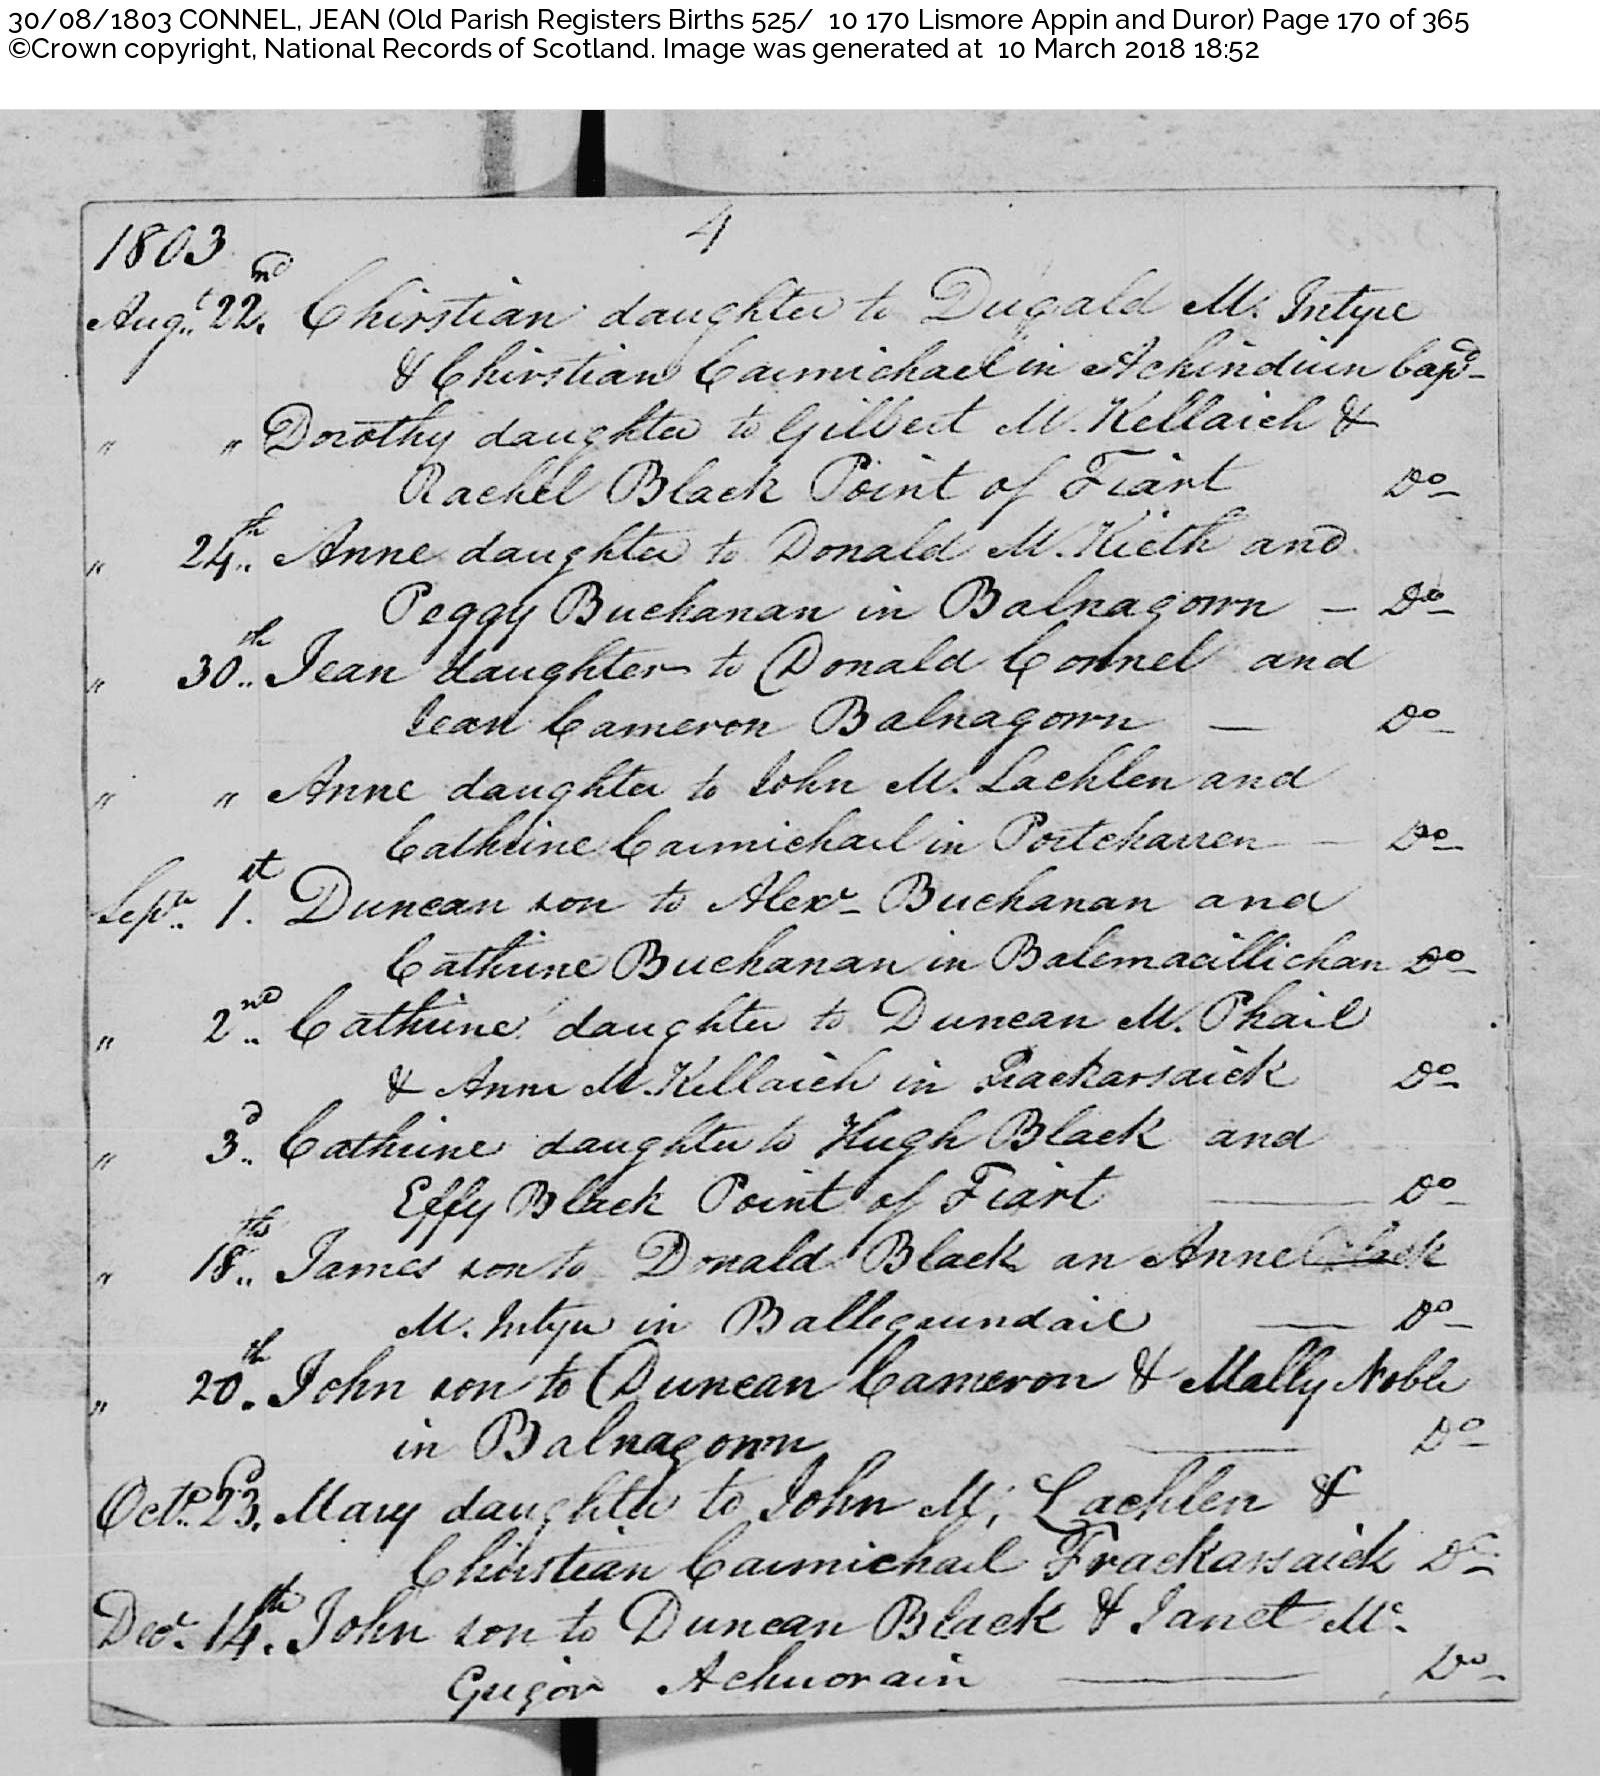 JeanConnel_B1803 Balnagowan Lismore, August 13, 1803, Linked To: <a href='i2076.html' >Jane Cameron</a> and <a href='i1218.html' >Donald Connell 溺</a>